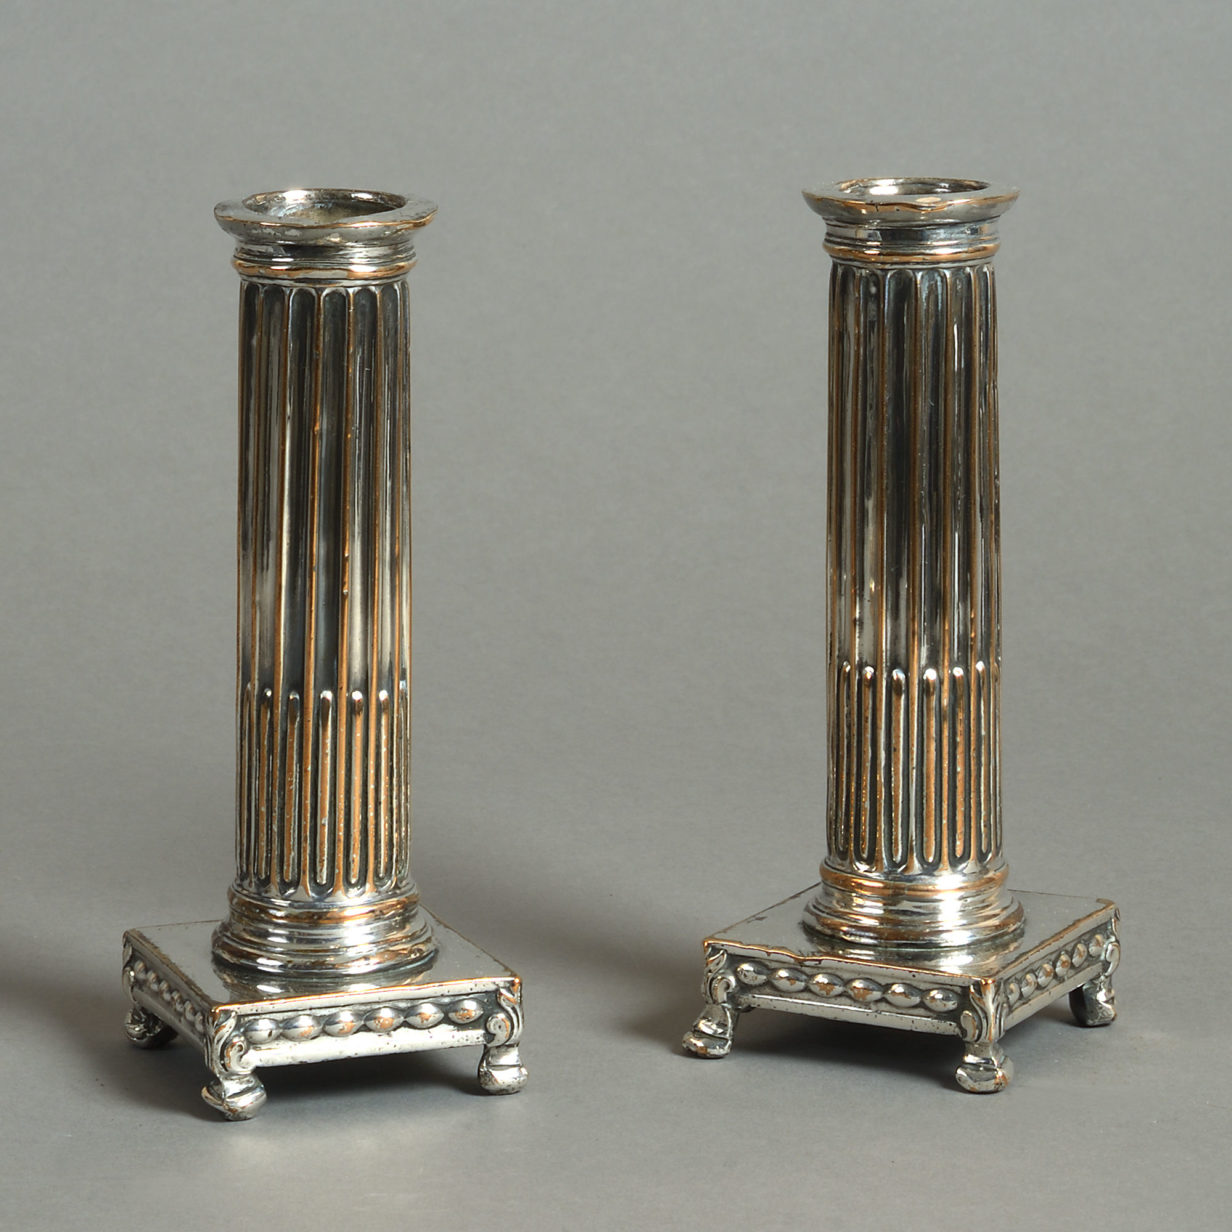 Early 19th century gustavian pair of silver plated candlesticks